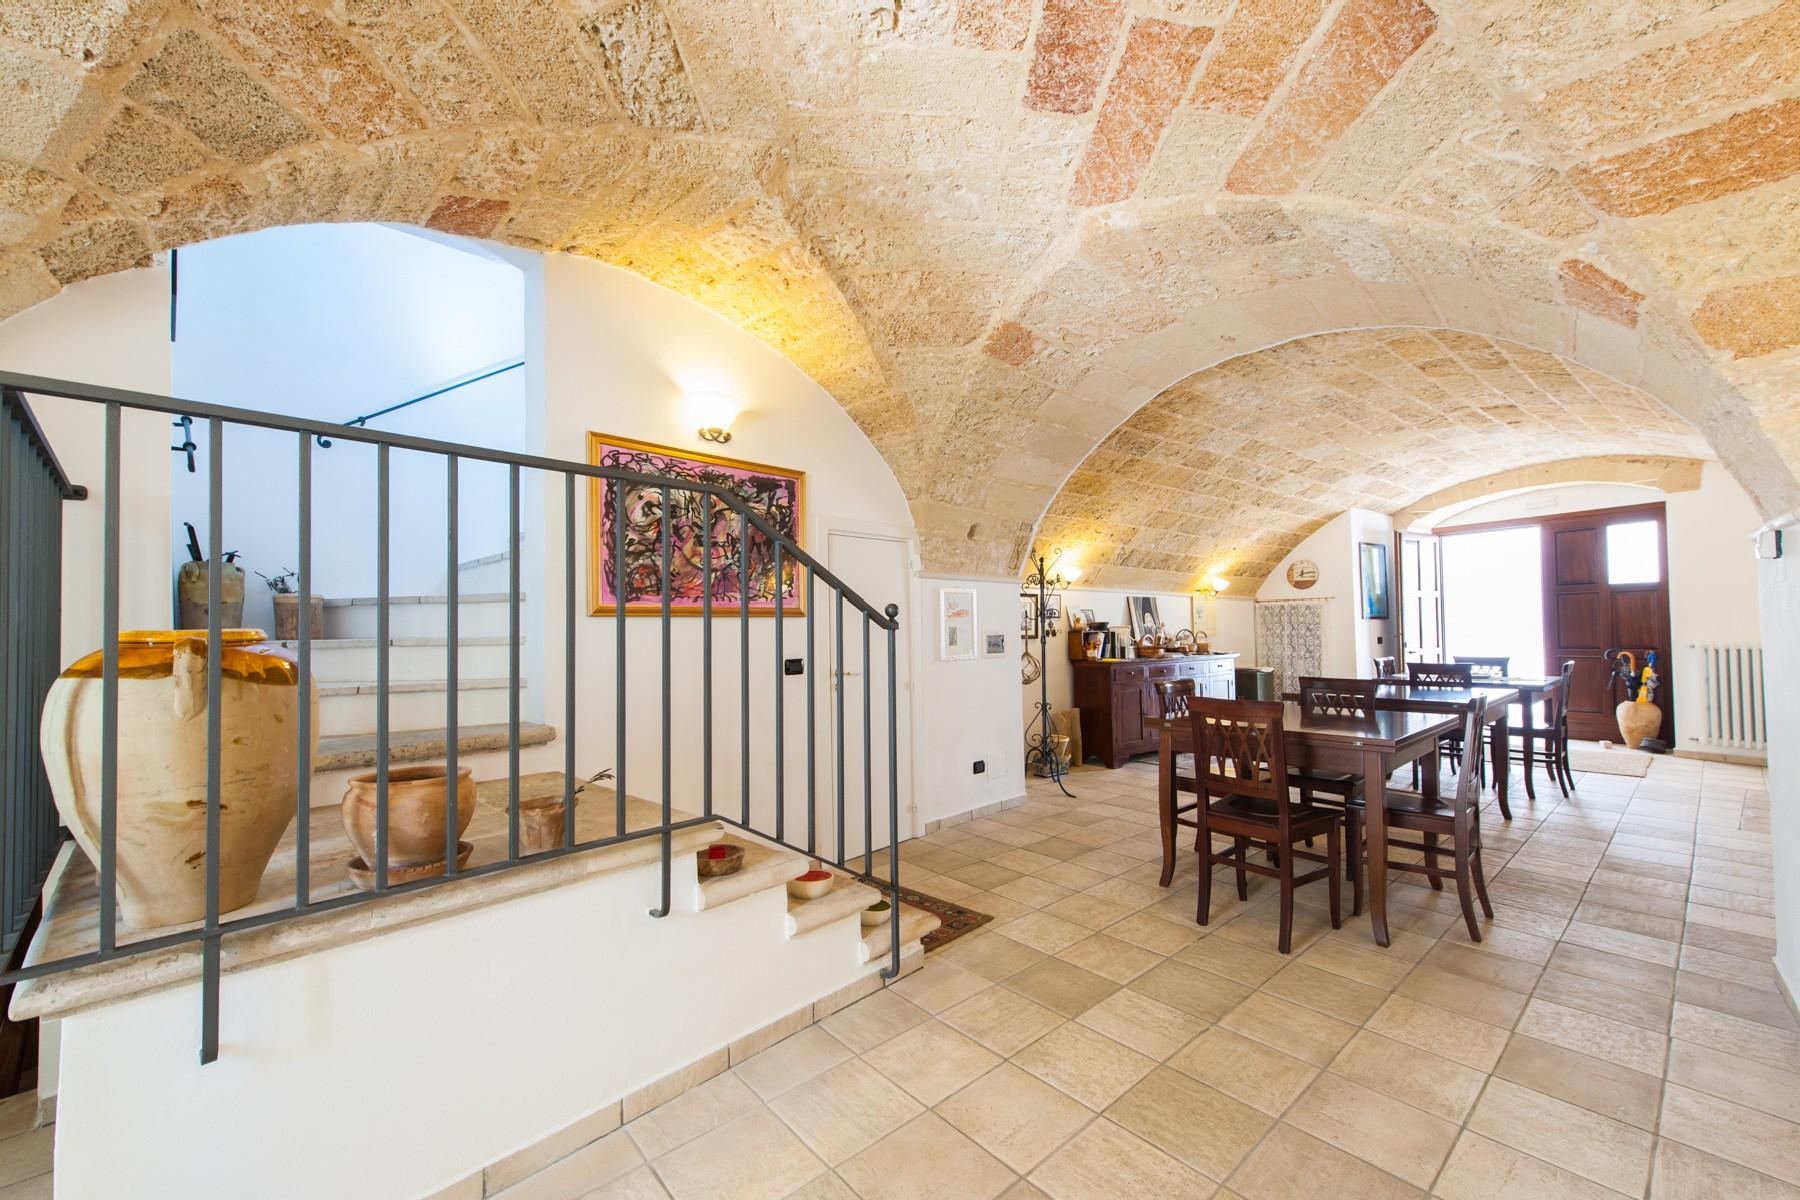 Perfectly renovated Palazzetto in the historic center of Parabita - 1